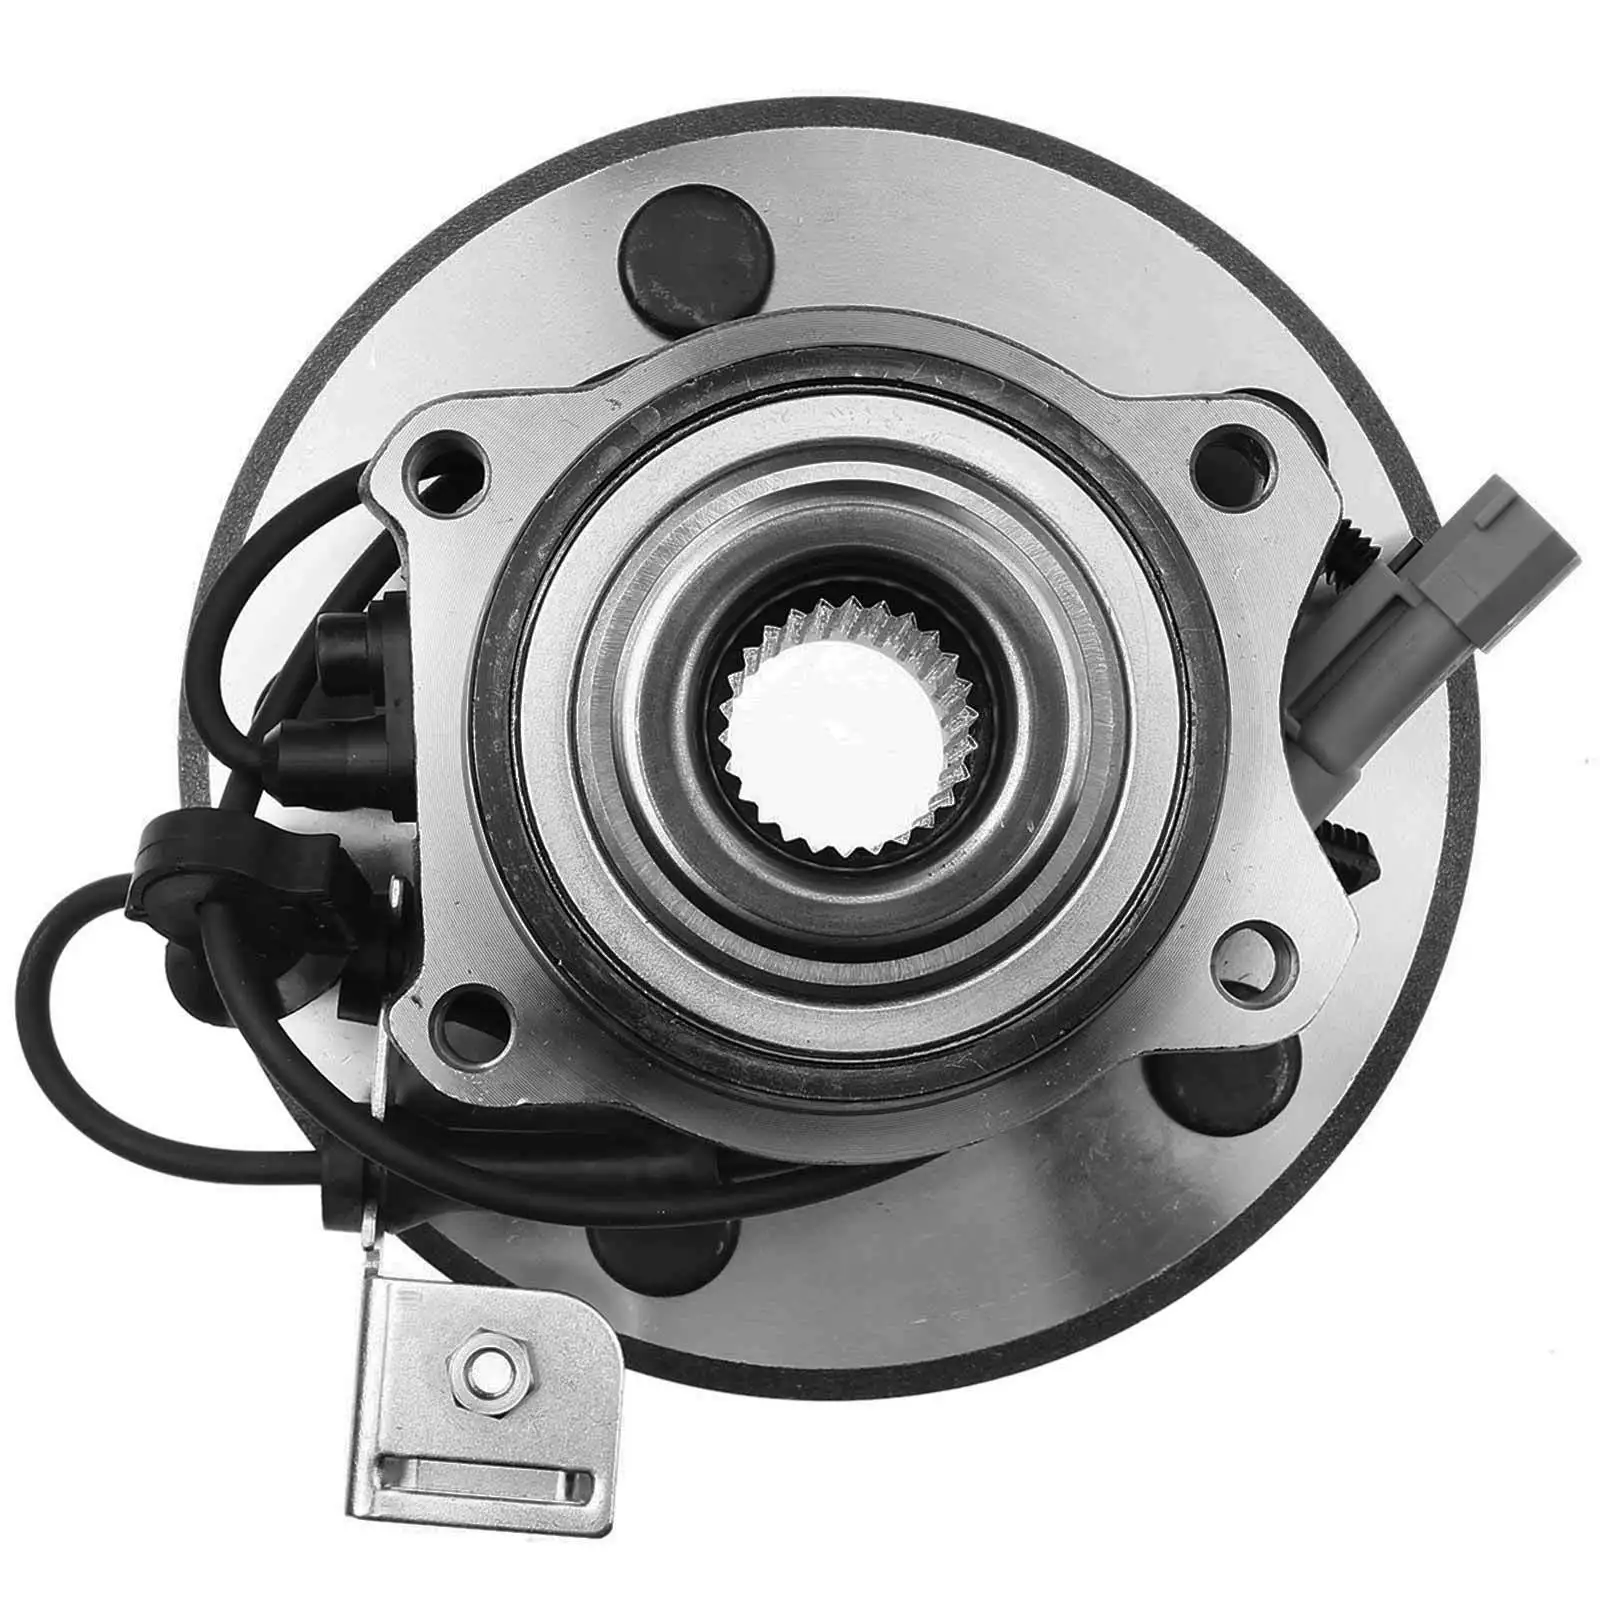 

A3 Repair Shop Front LH / RH Wheel Hub & Bearing Assembly for Chrysler Pacific a2004 2005 2006